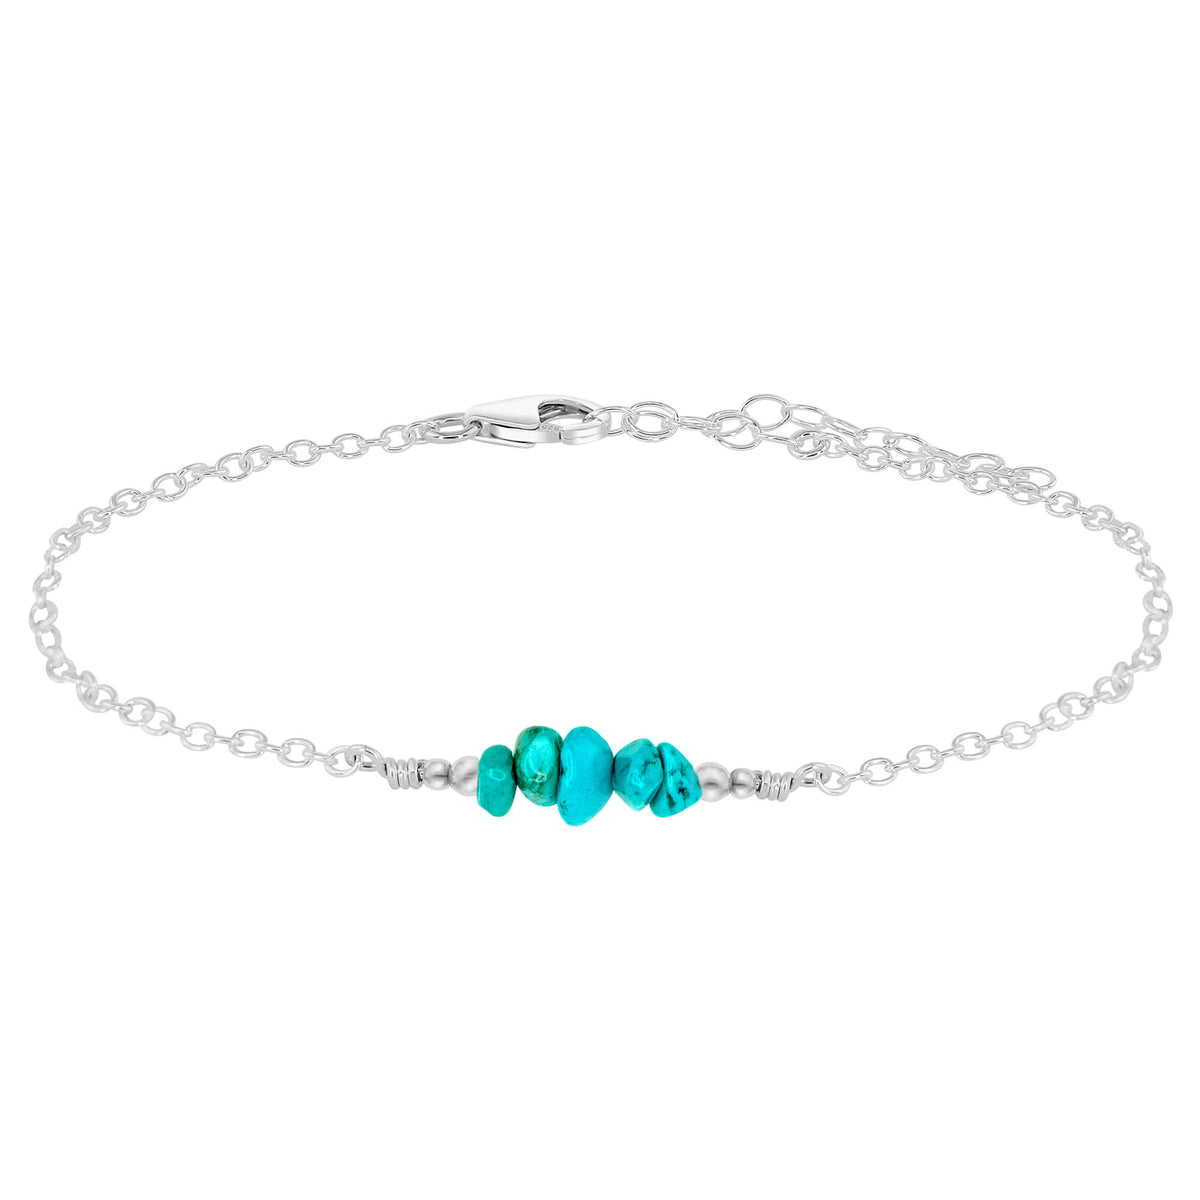 Chip Bead Bar Anklet - Turquoise - Sterling Silver - Luna Tide Handmade Jewellery